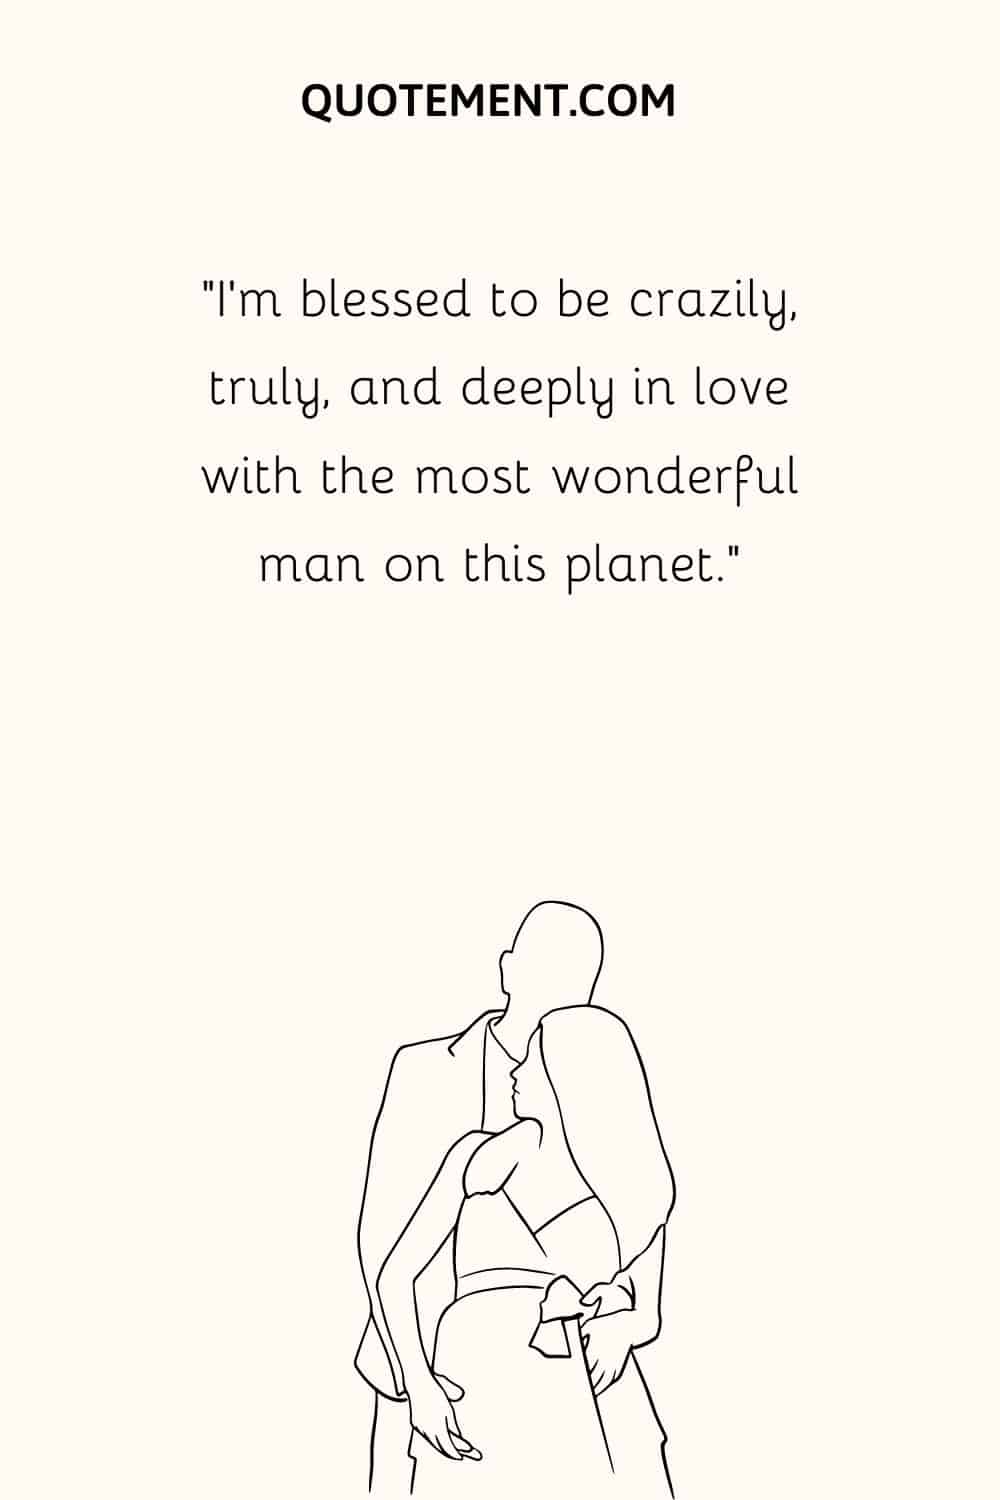 “I’m blessed to be crazily, truly, and deeply in love with the most wonderful man on this planet.”